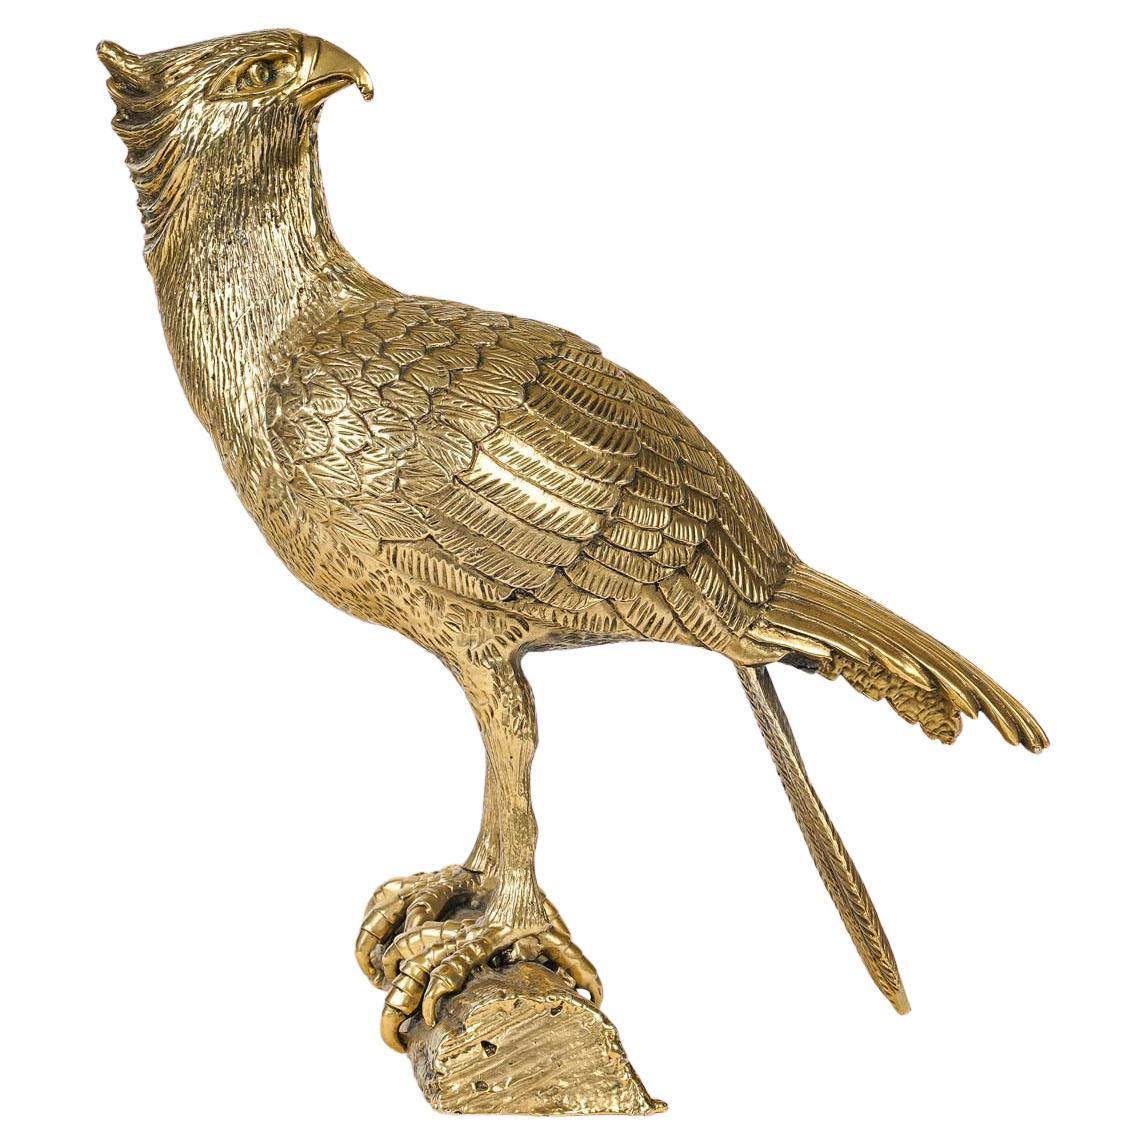 Large Sculpture of an Eagle in Silver Plated Metal, 20th Century.